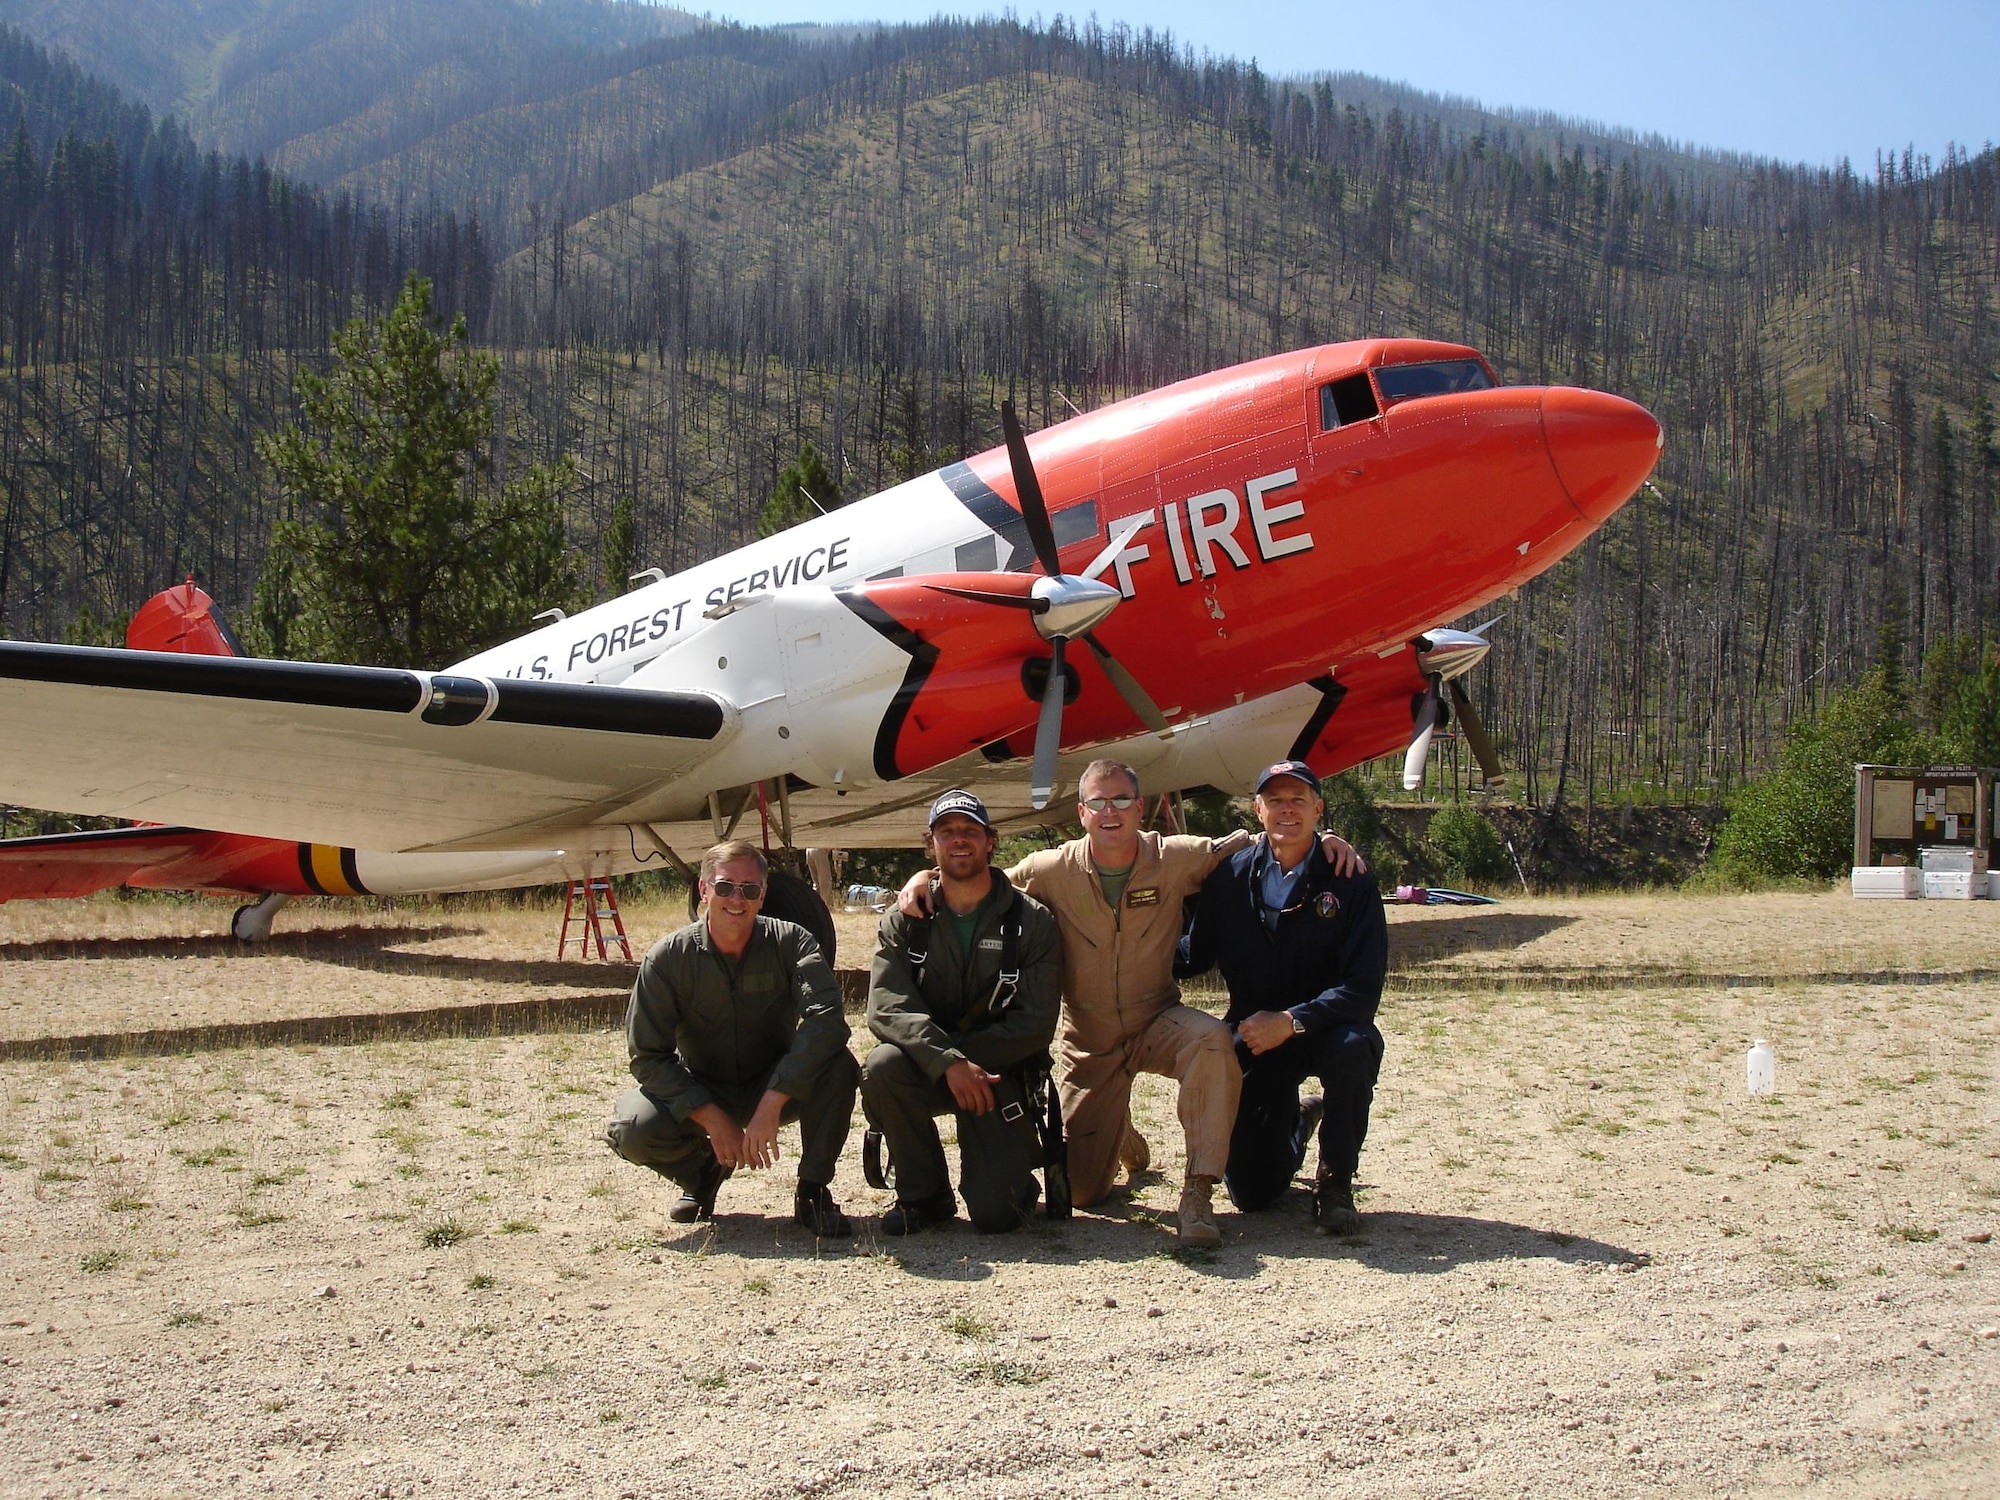 Col. Paul "Buster" Delmonte, the Emergency Preparedness Liaison Officer for Utah, is a lead plane pilot for the U.S. Forest Service as a civilian. In this capacity, he acts as a sort of forward operator, directing other fire fighting aircraft where to drop fire retardant. Delmonte is pictured here in a tan flight suit in front of one of his aircraft, a DC-3.